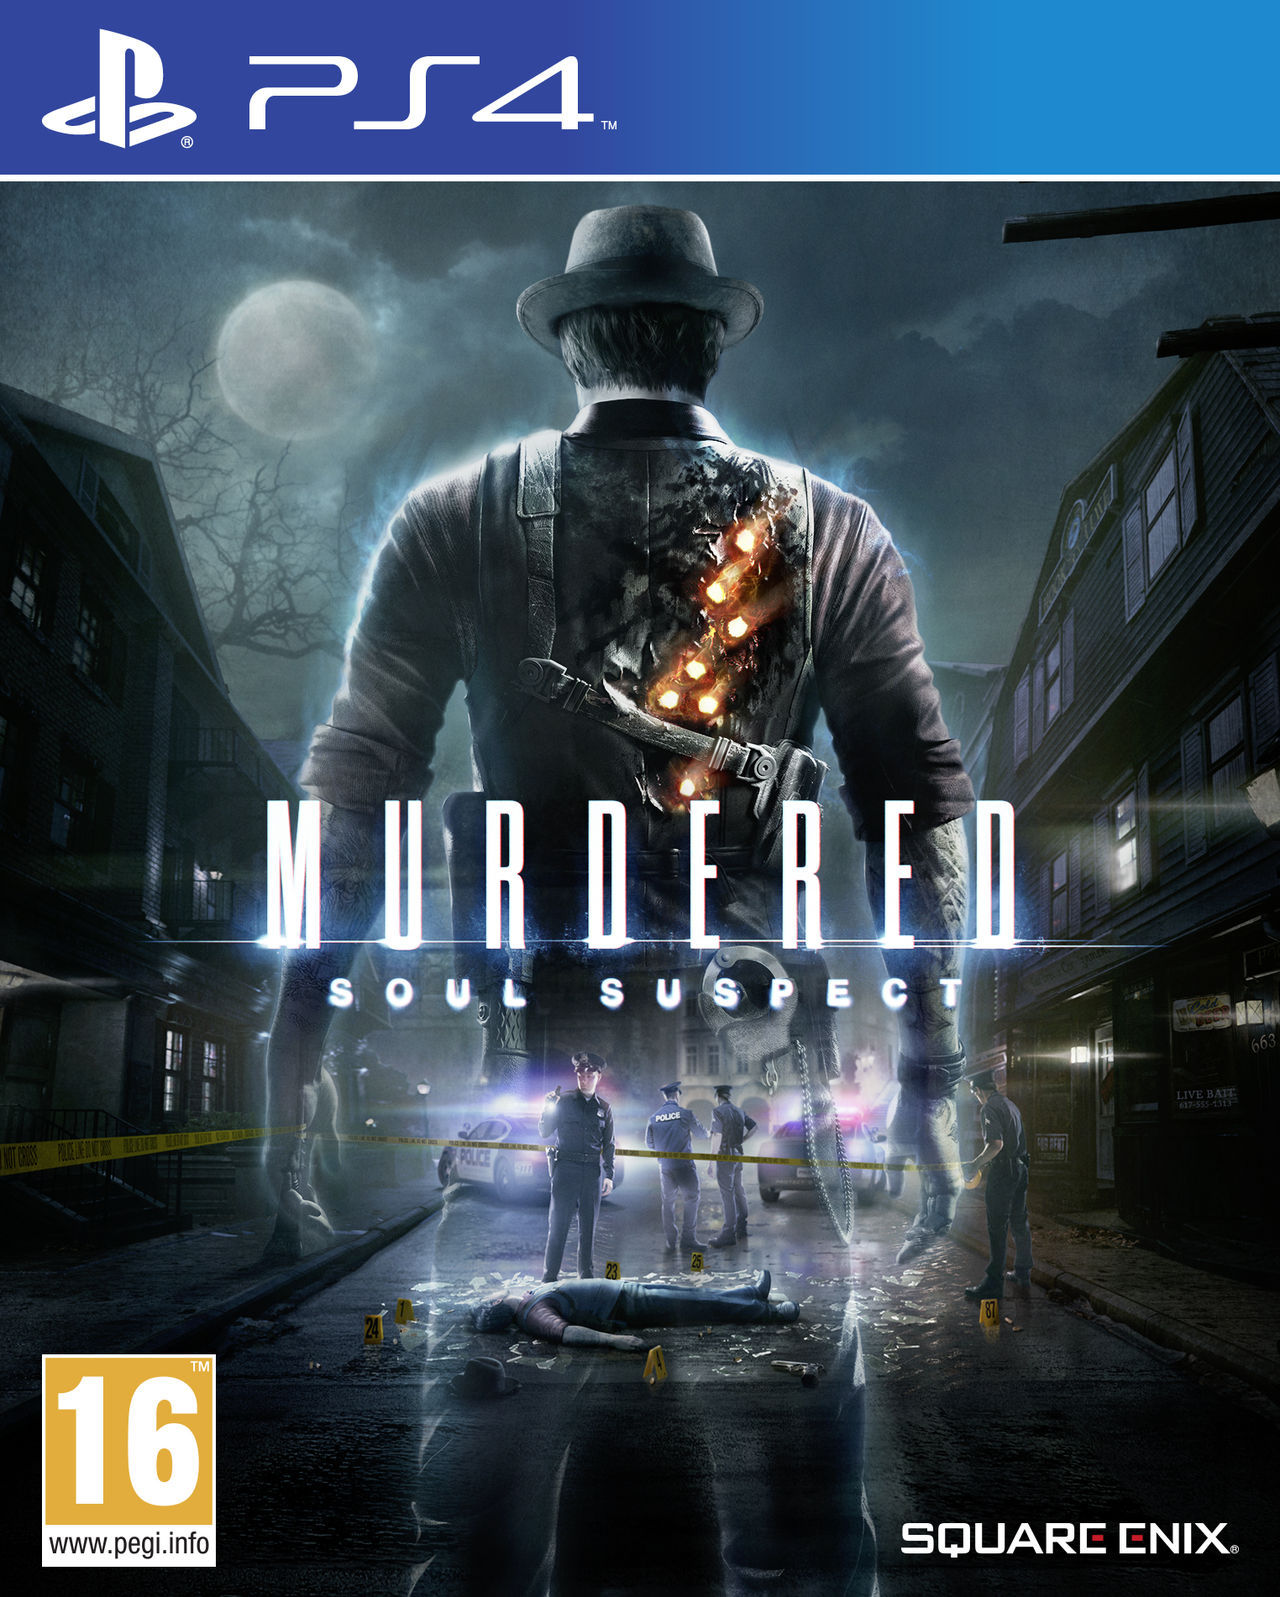 download murdered ps4 for free